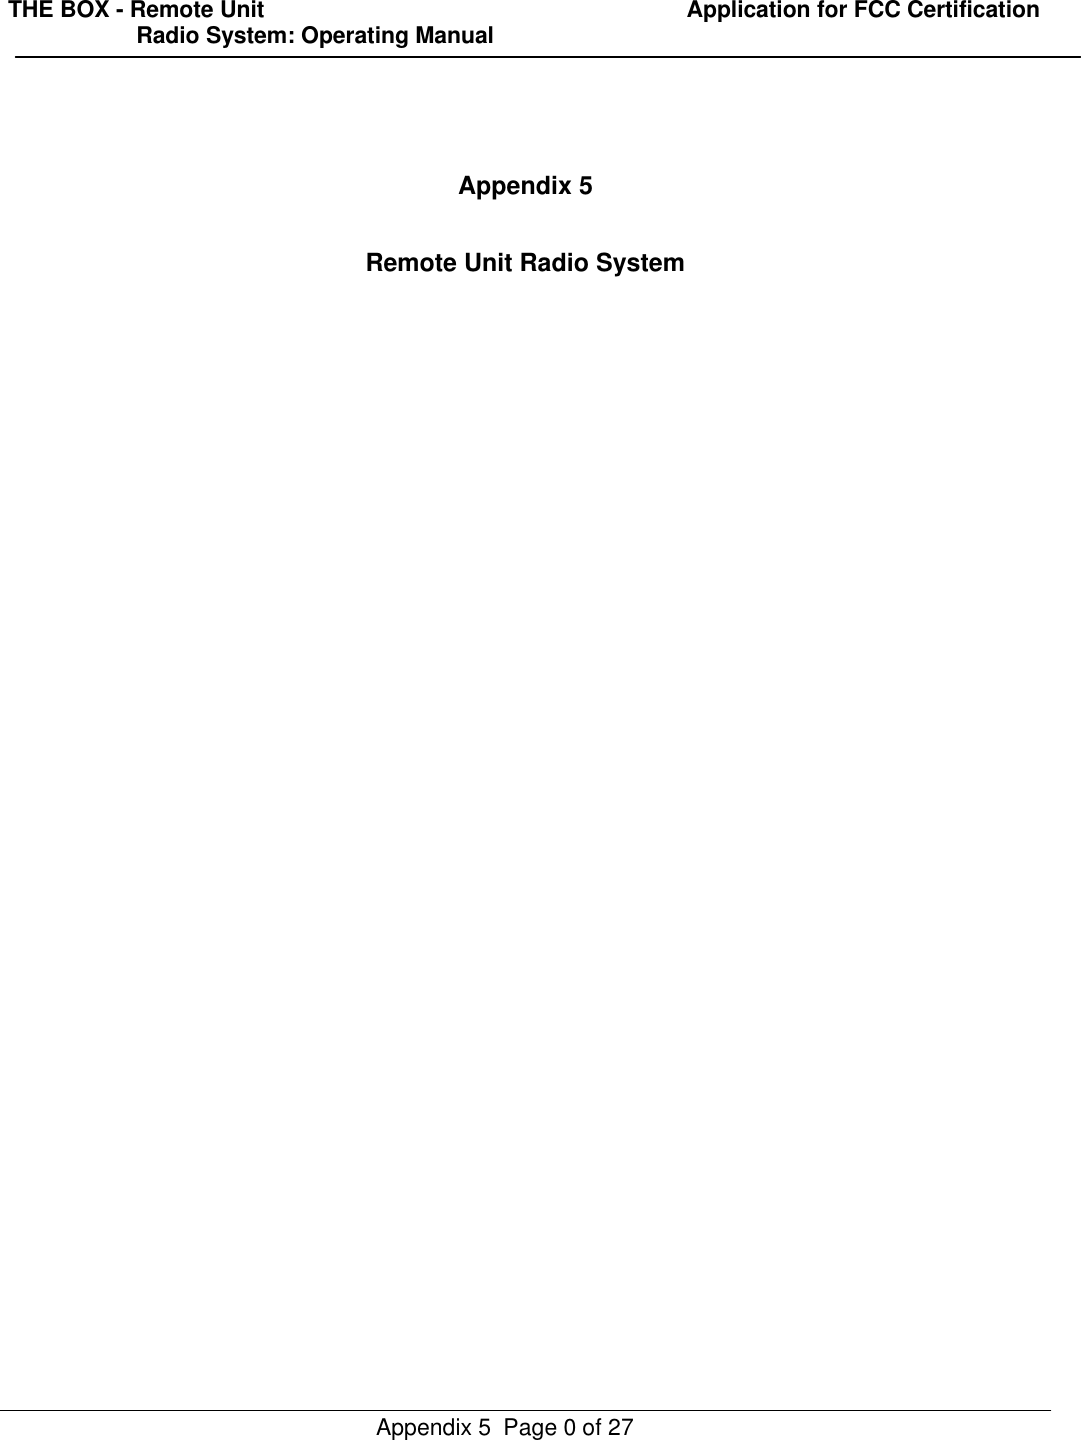 THE BOX - Remote Unit                                                                  Application for FCC Certification                    Radio System: Operating ManualAppendix 5  Page 0 of 27Appendix 5Remote Unit Radio System